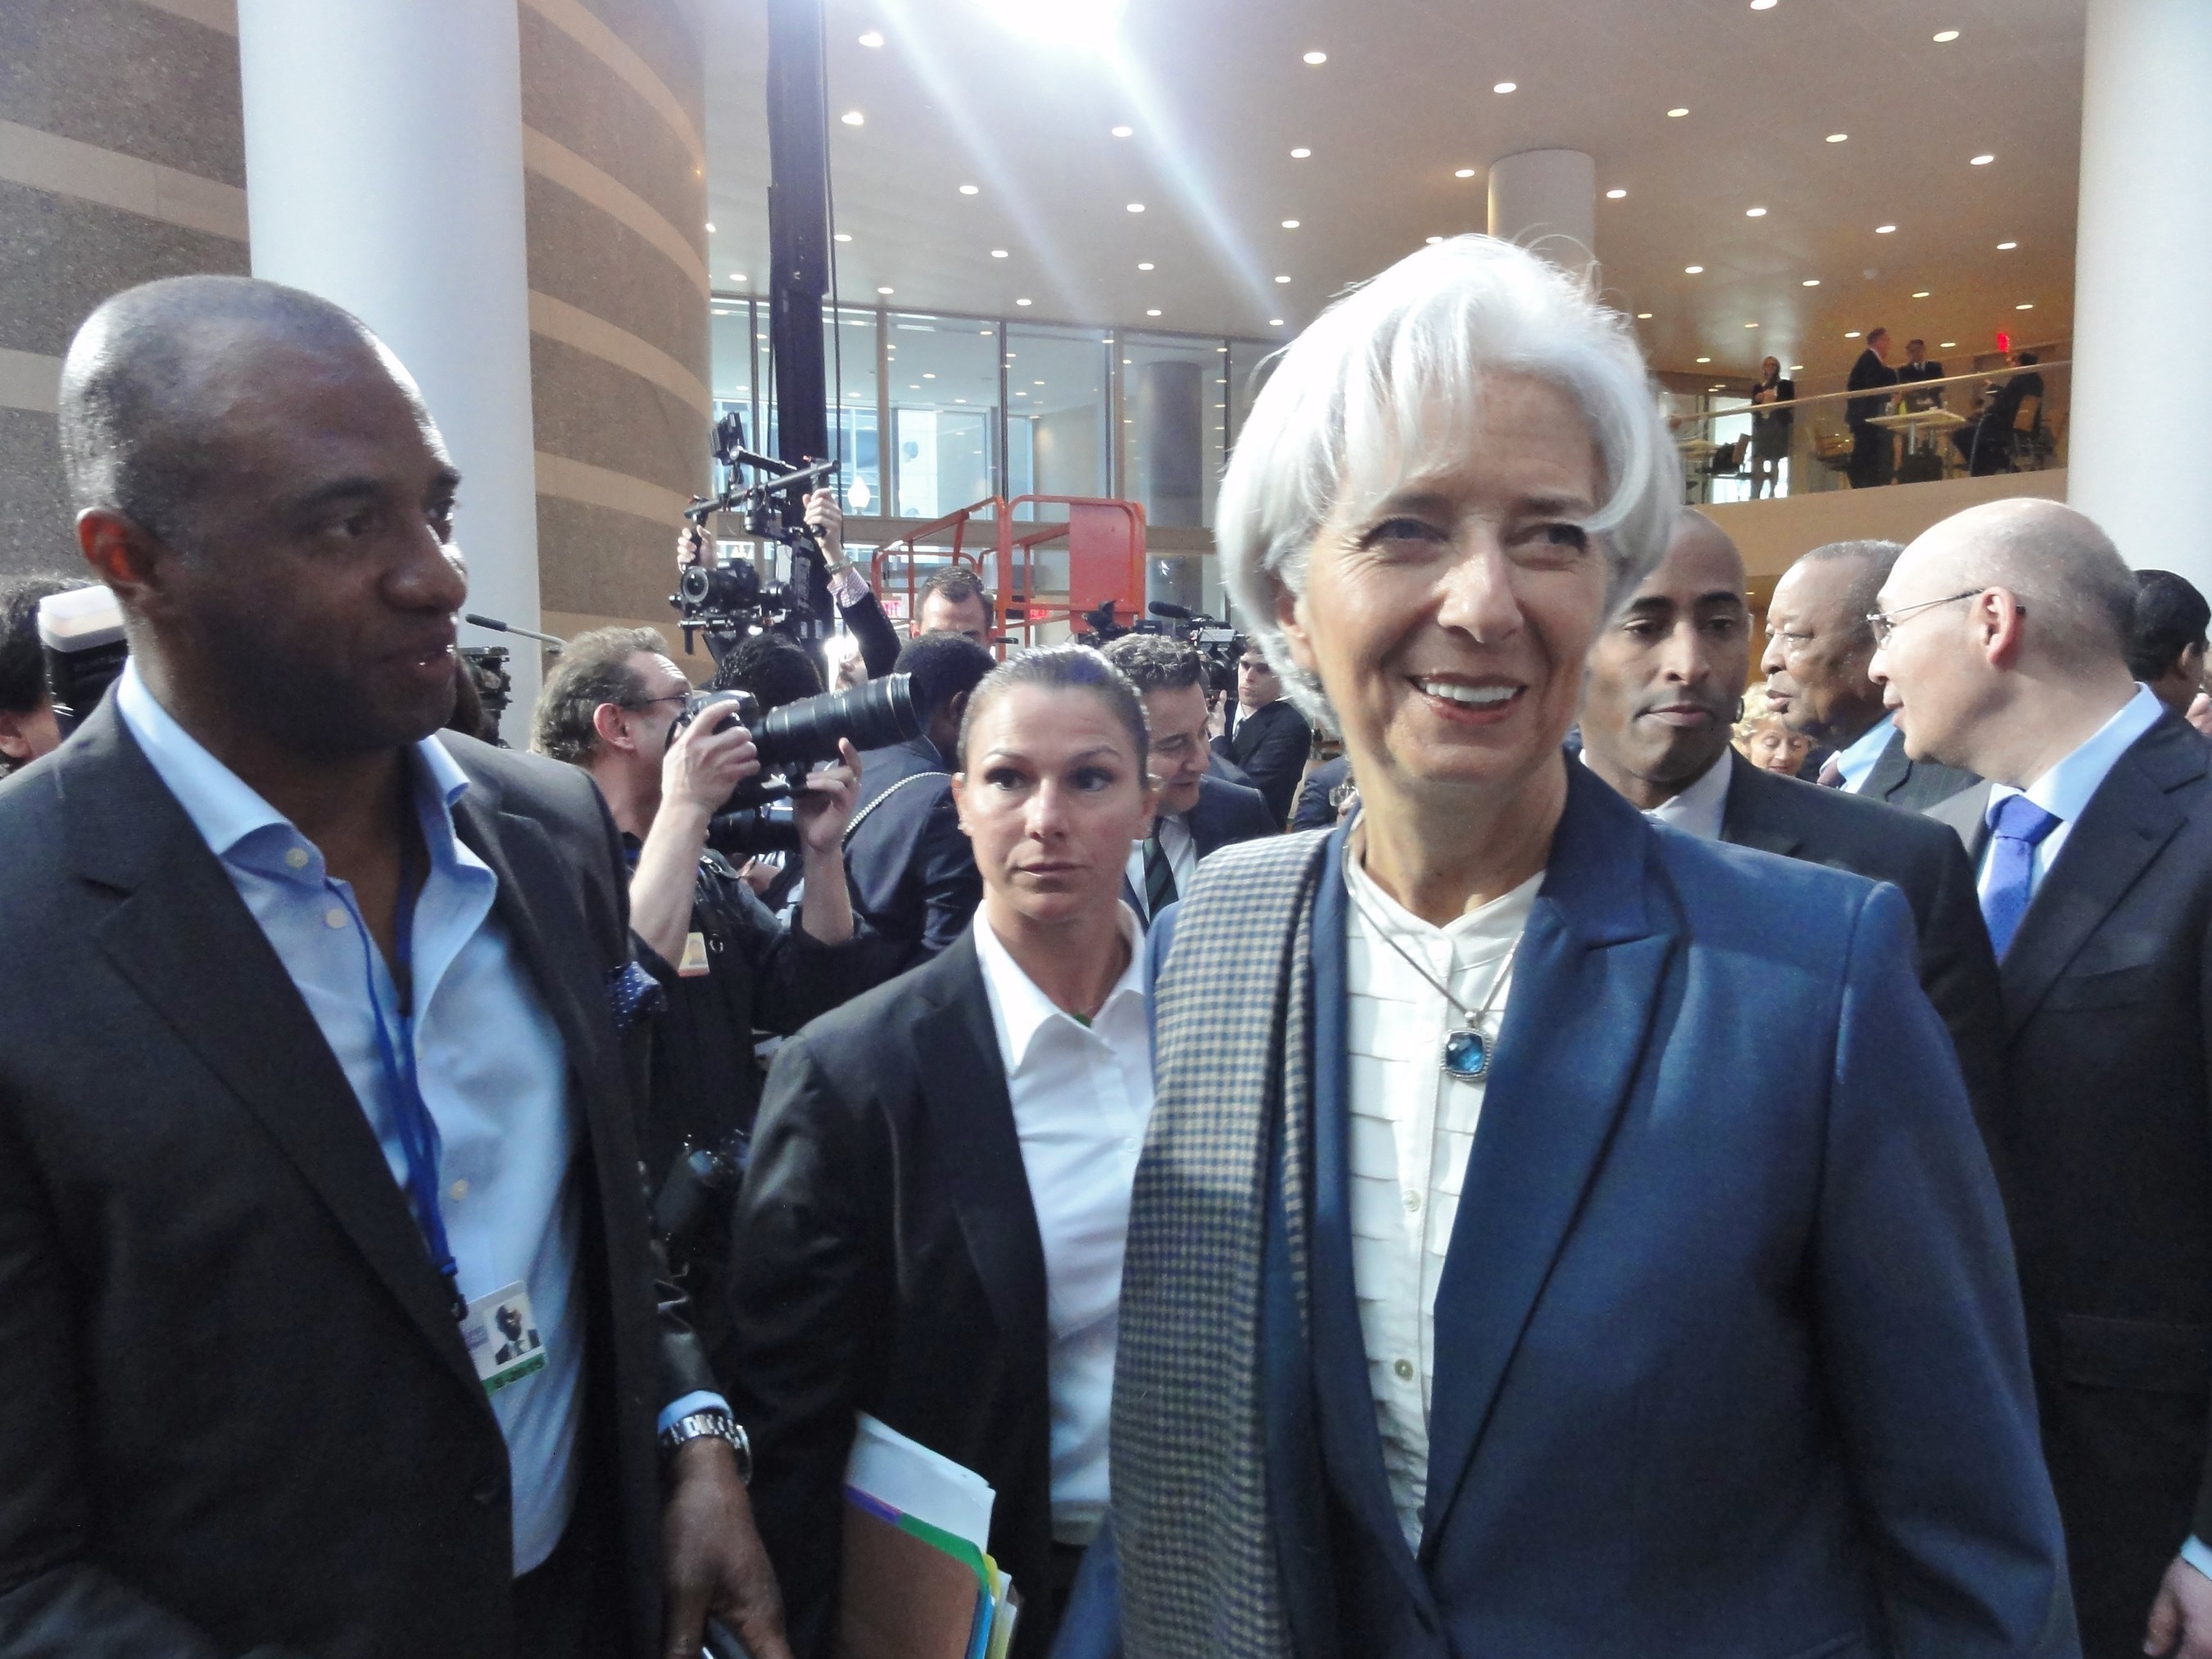 AIA Group Chairman Shawn Baldwin joins International Monetary Fund Managing Director Christine Lagarde at the 2015 IMF and World Bank spring meetings in Washington, D.C.